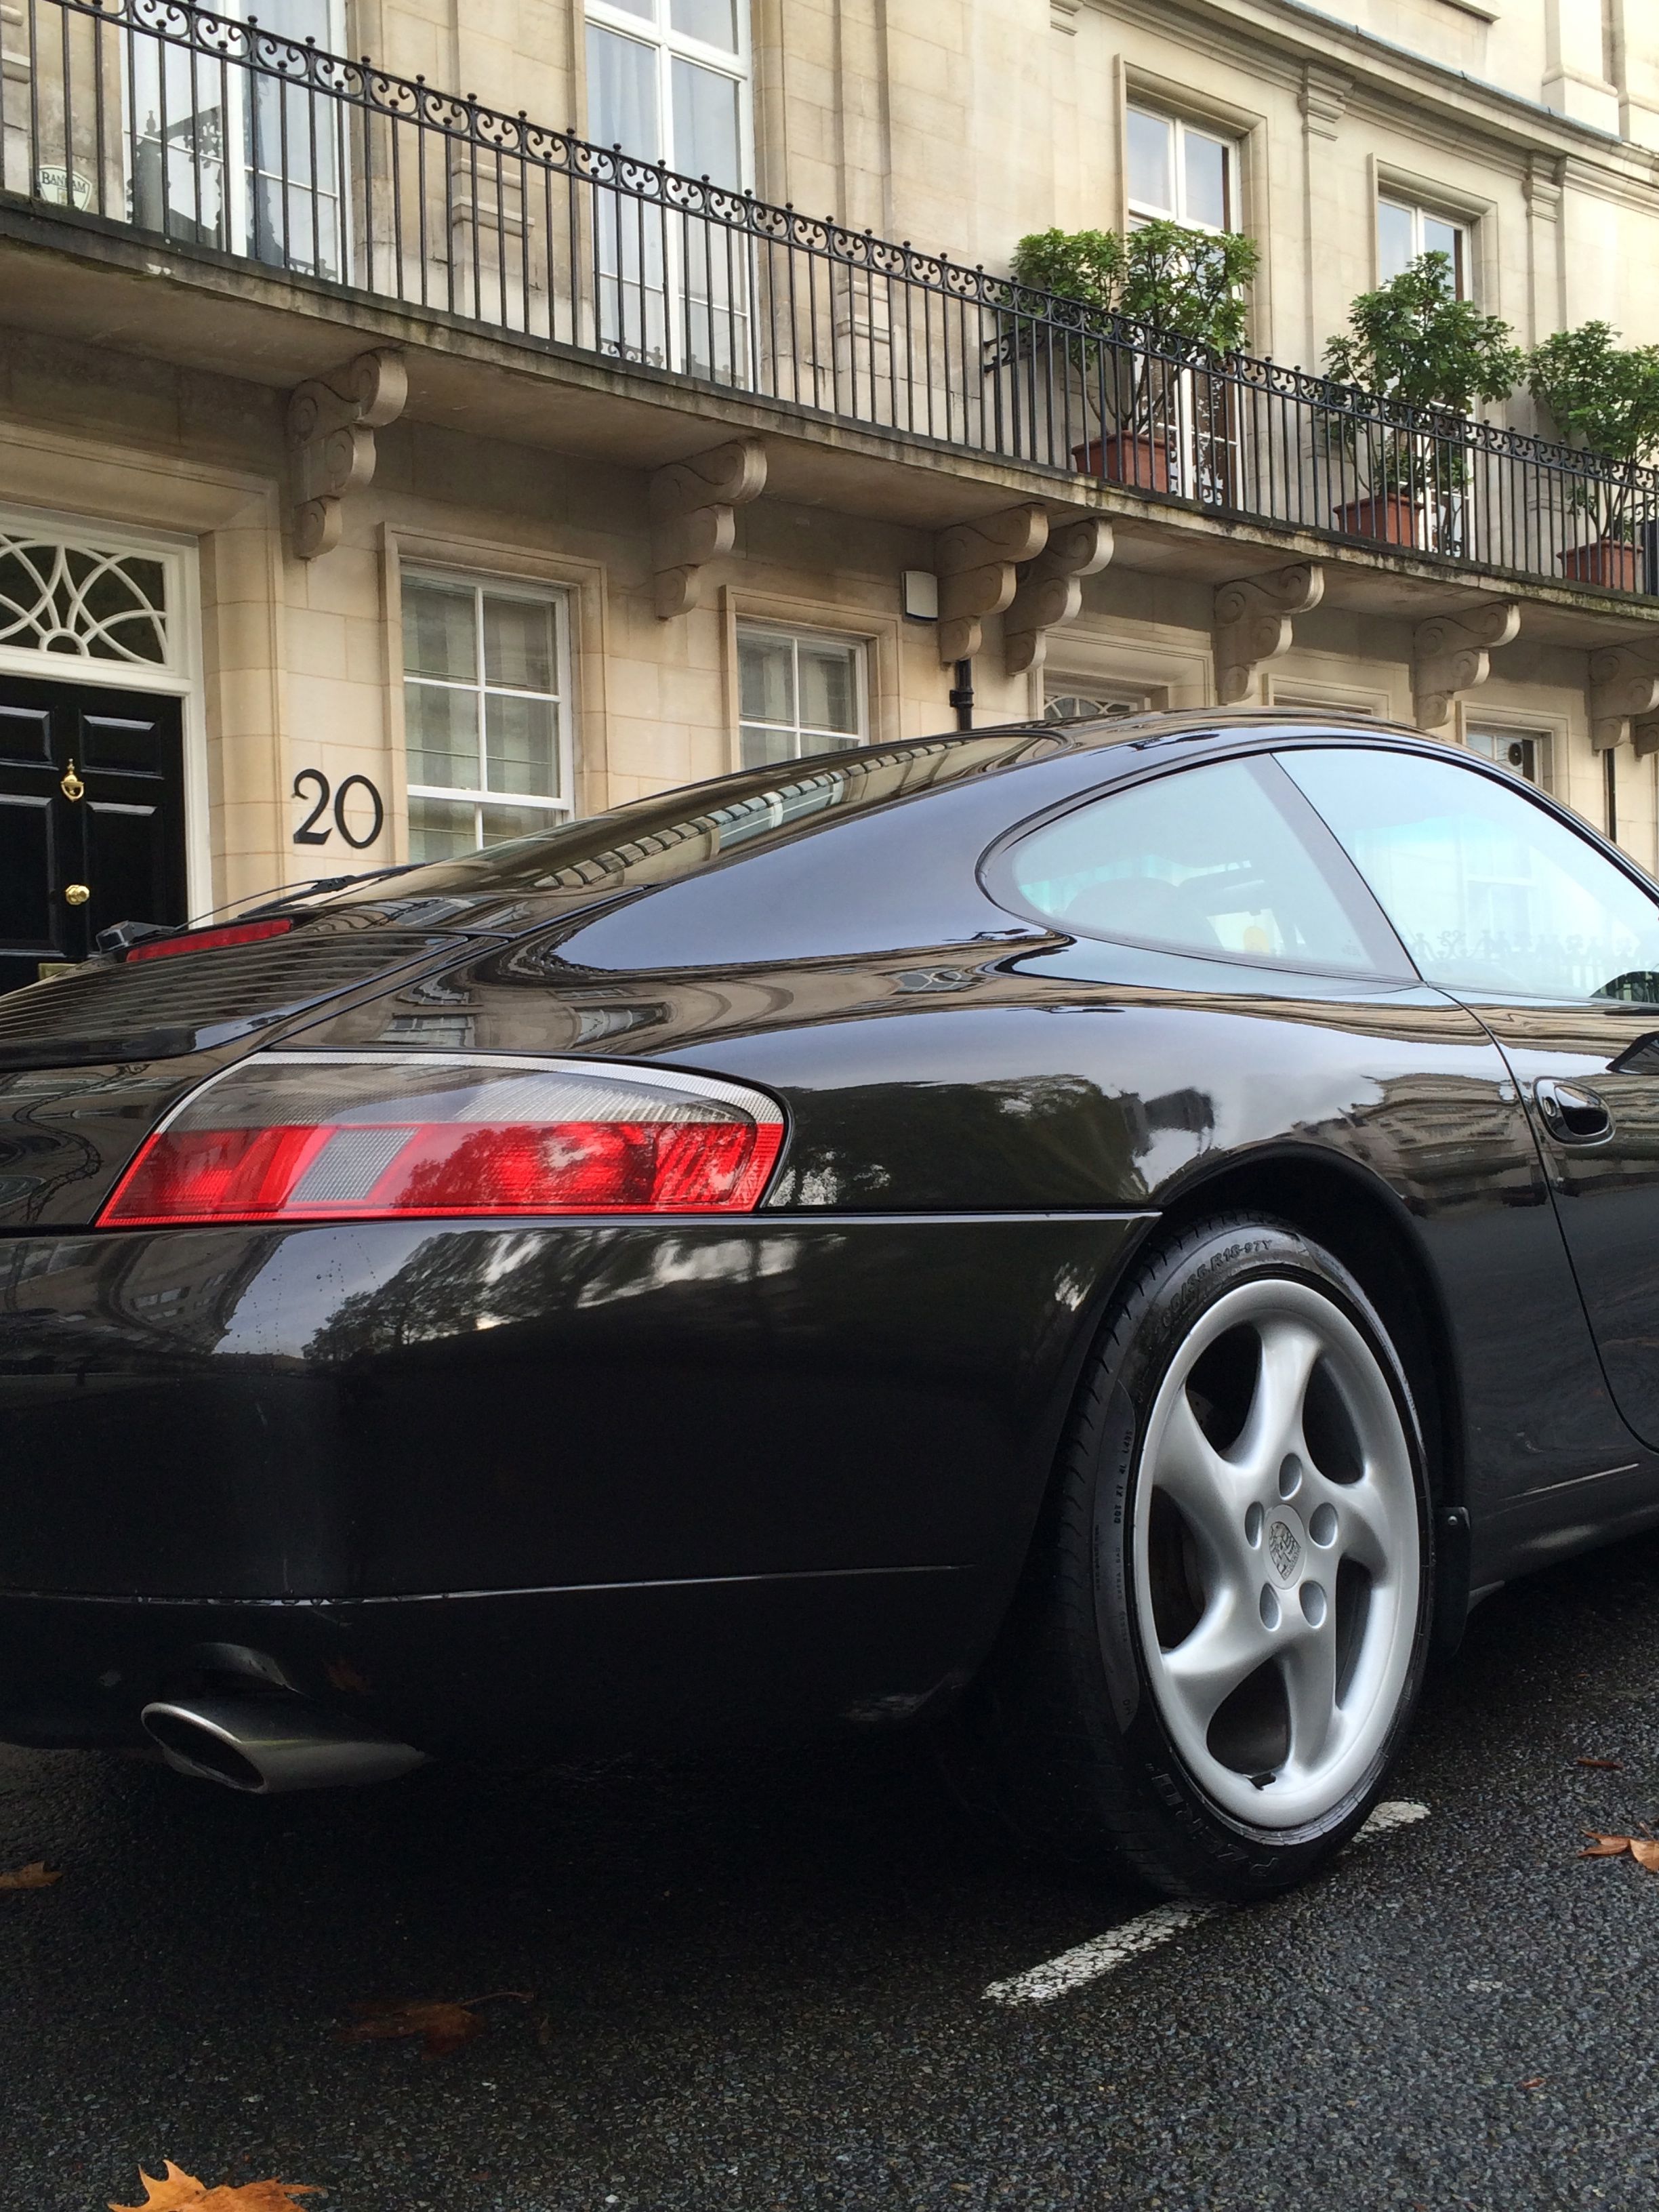 Porsche 911 (996) + Car History - Page 1 - Readers' Cars - PistonHeads